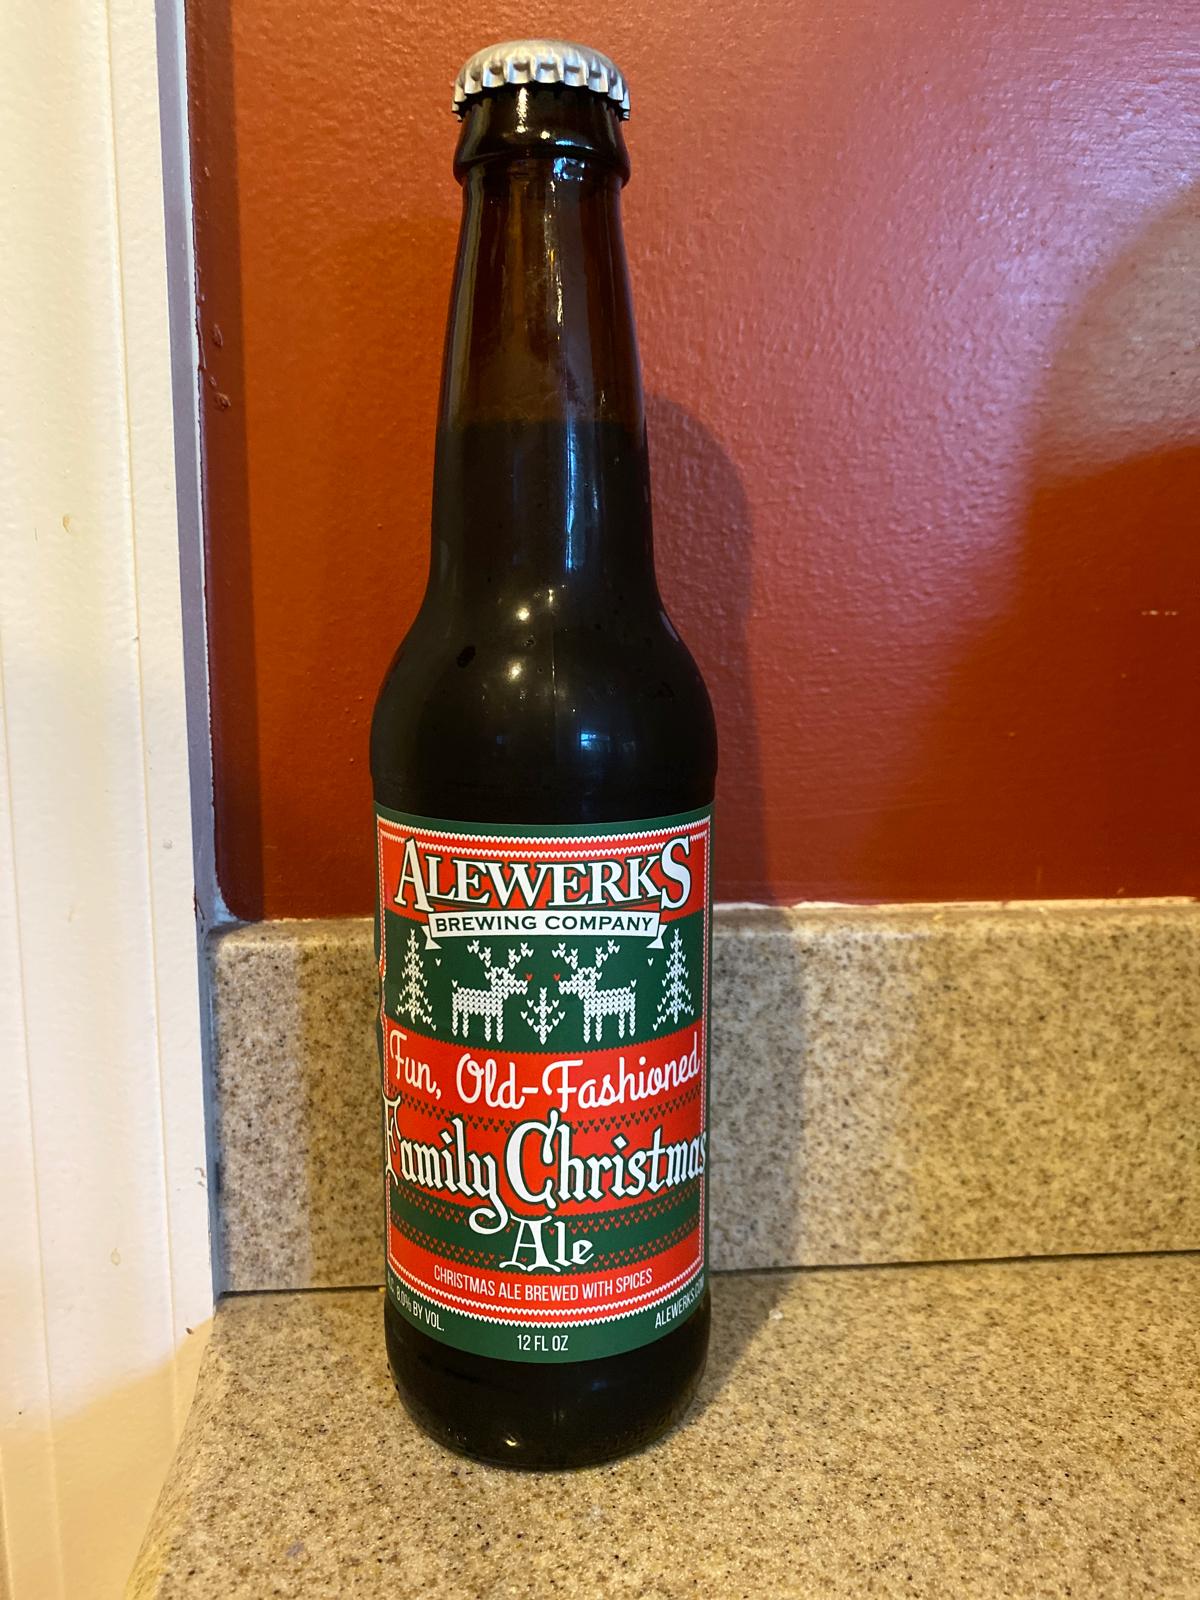 Fun, Old-Fashioned Family Christmas Ale